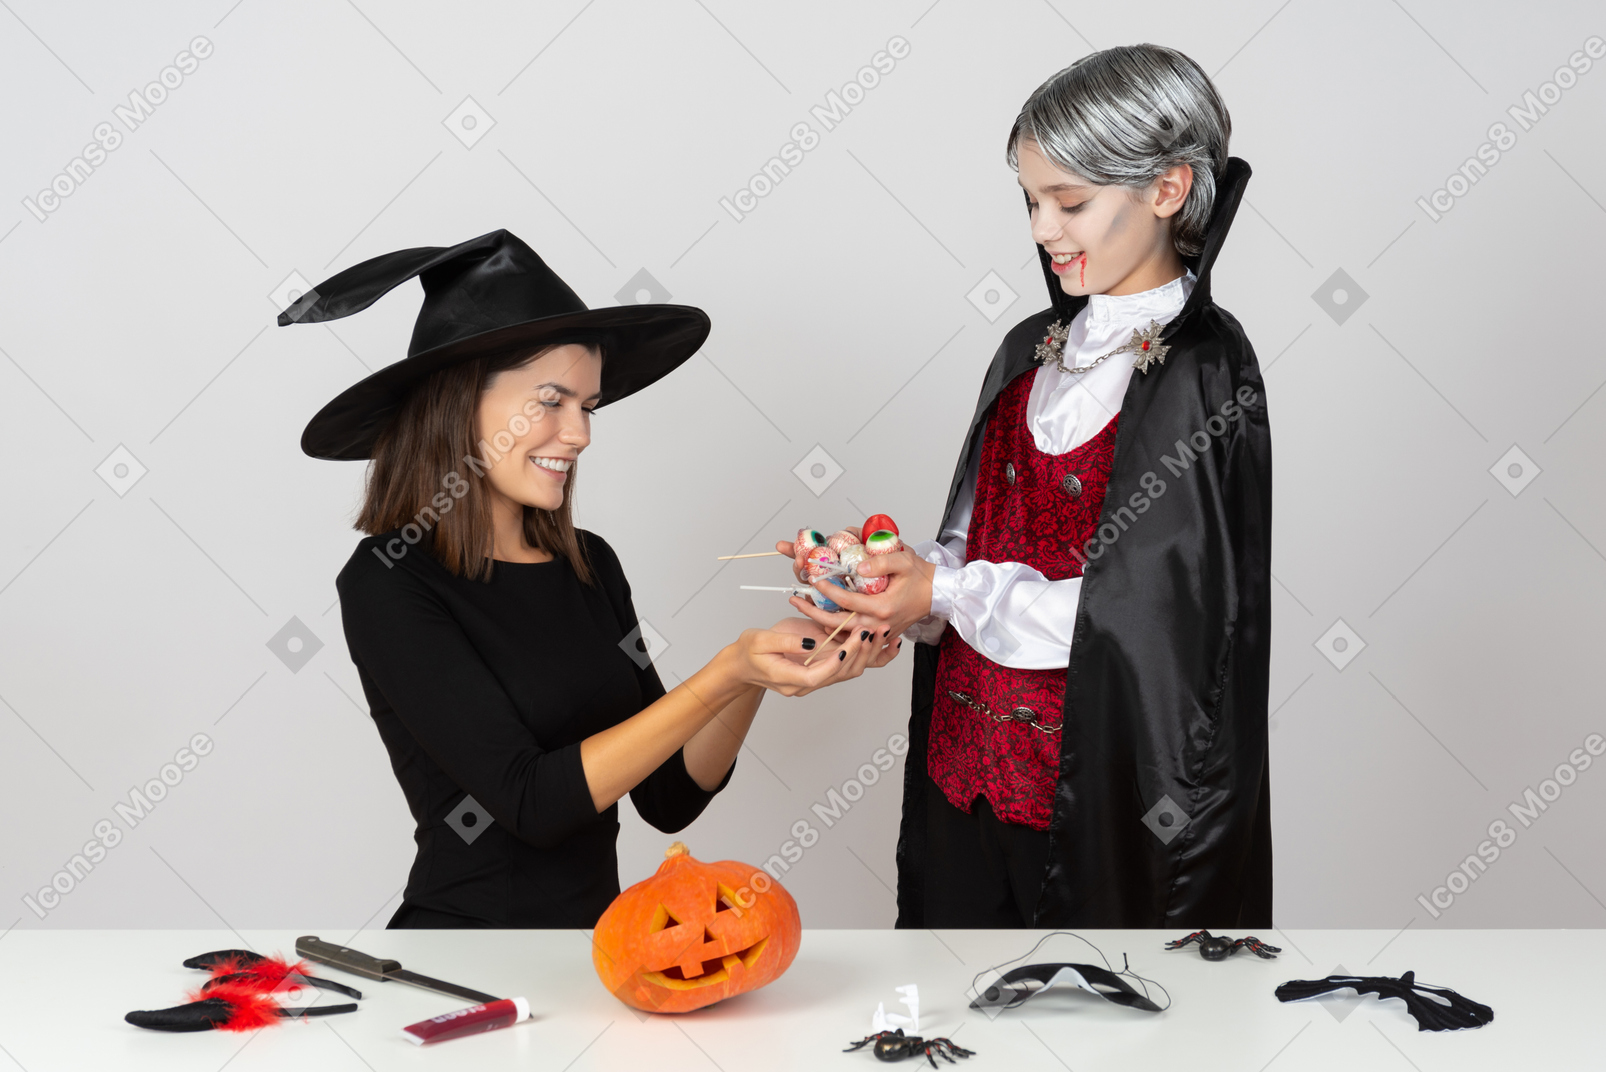 Boy in vampire costume showing pile of candies to mum